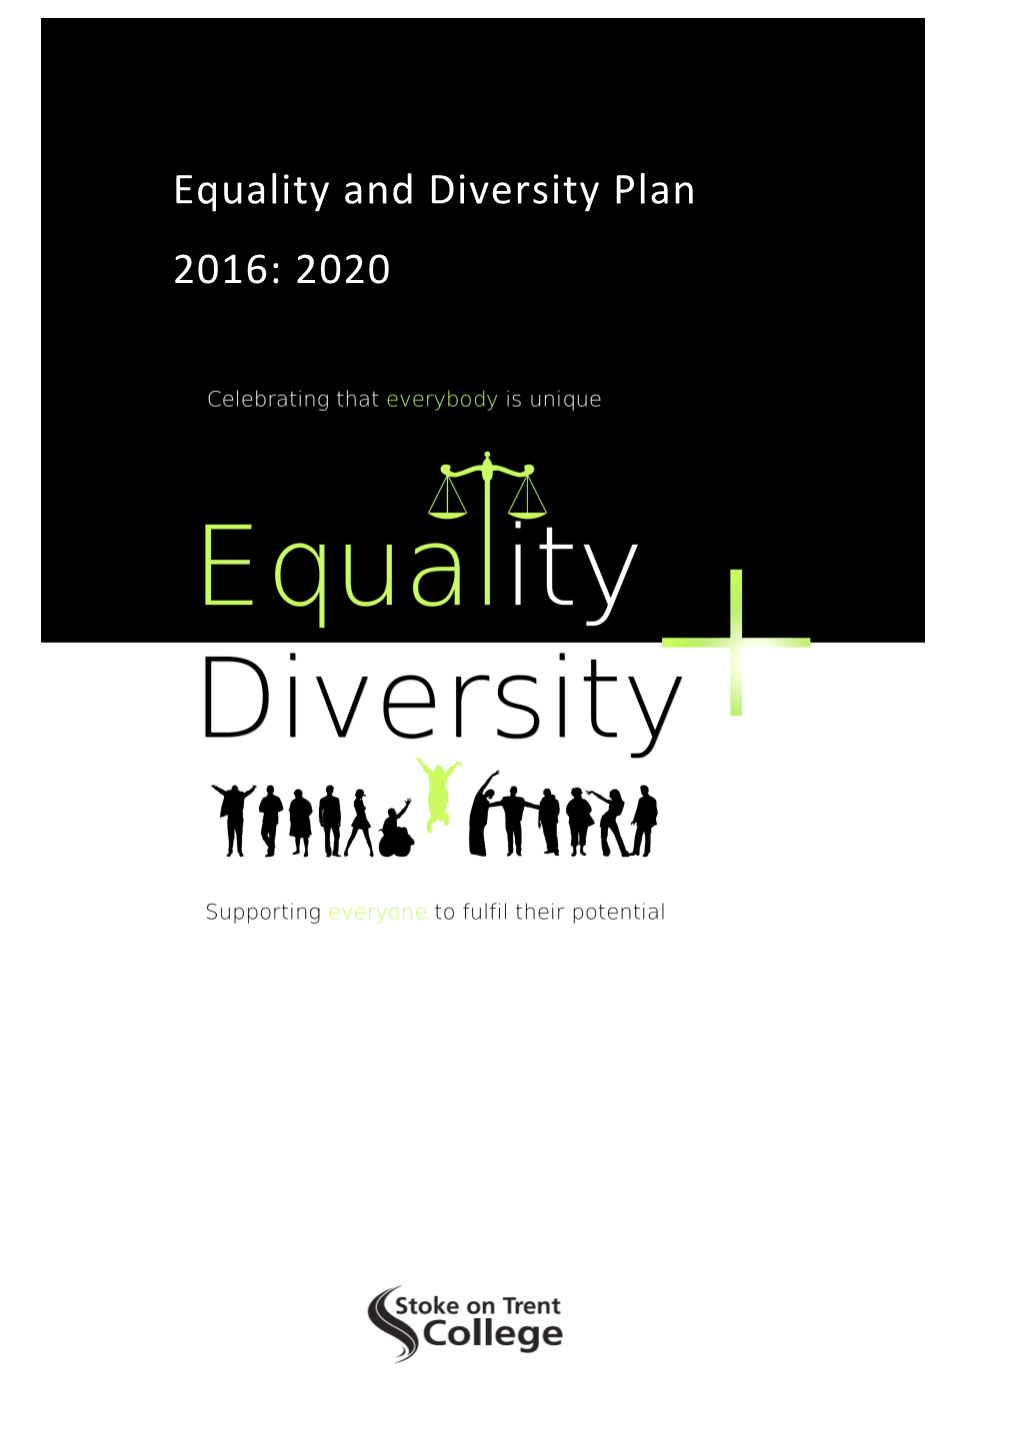 Welcome to Our Equality and Diversity Plan 2016-2020